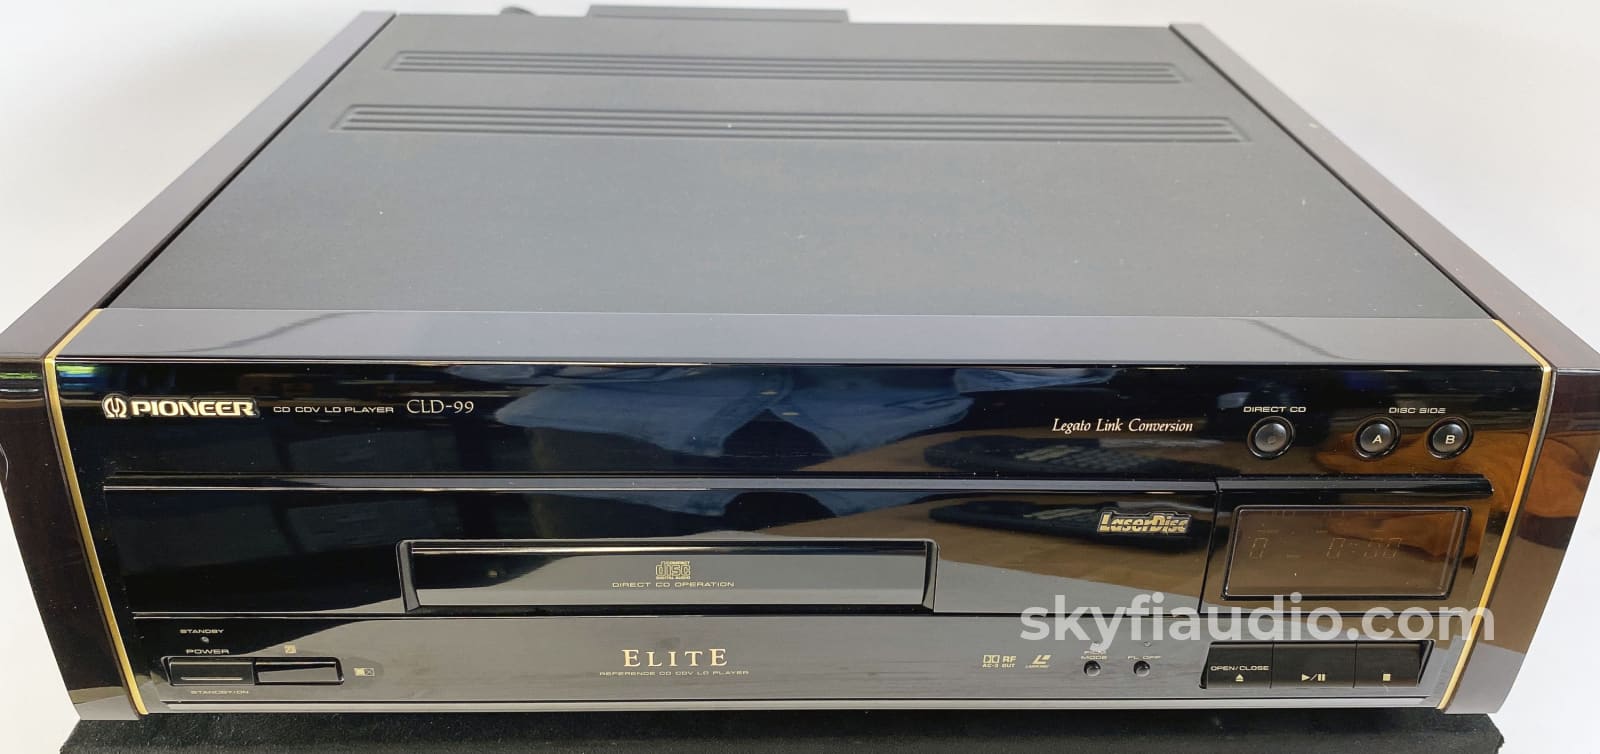 Pioneer Elite Cld-99 Cd/Ld - Plays Both Cds And Lds With Separate Drawers Cd + Digital